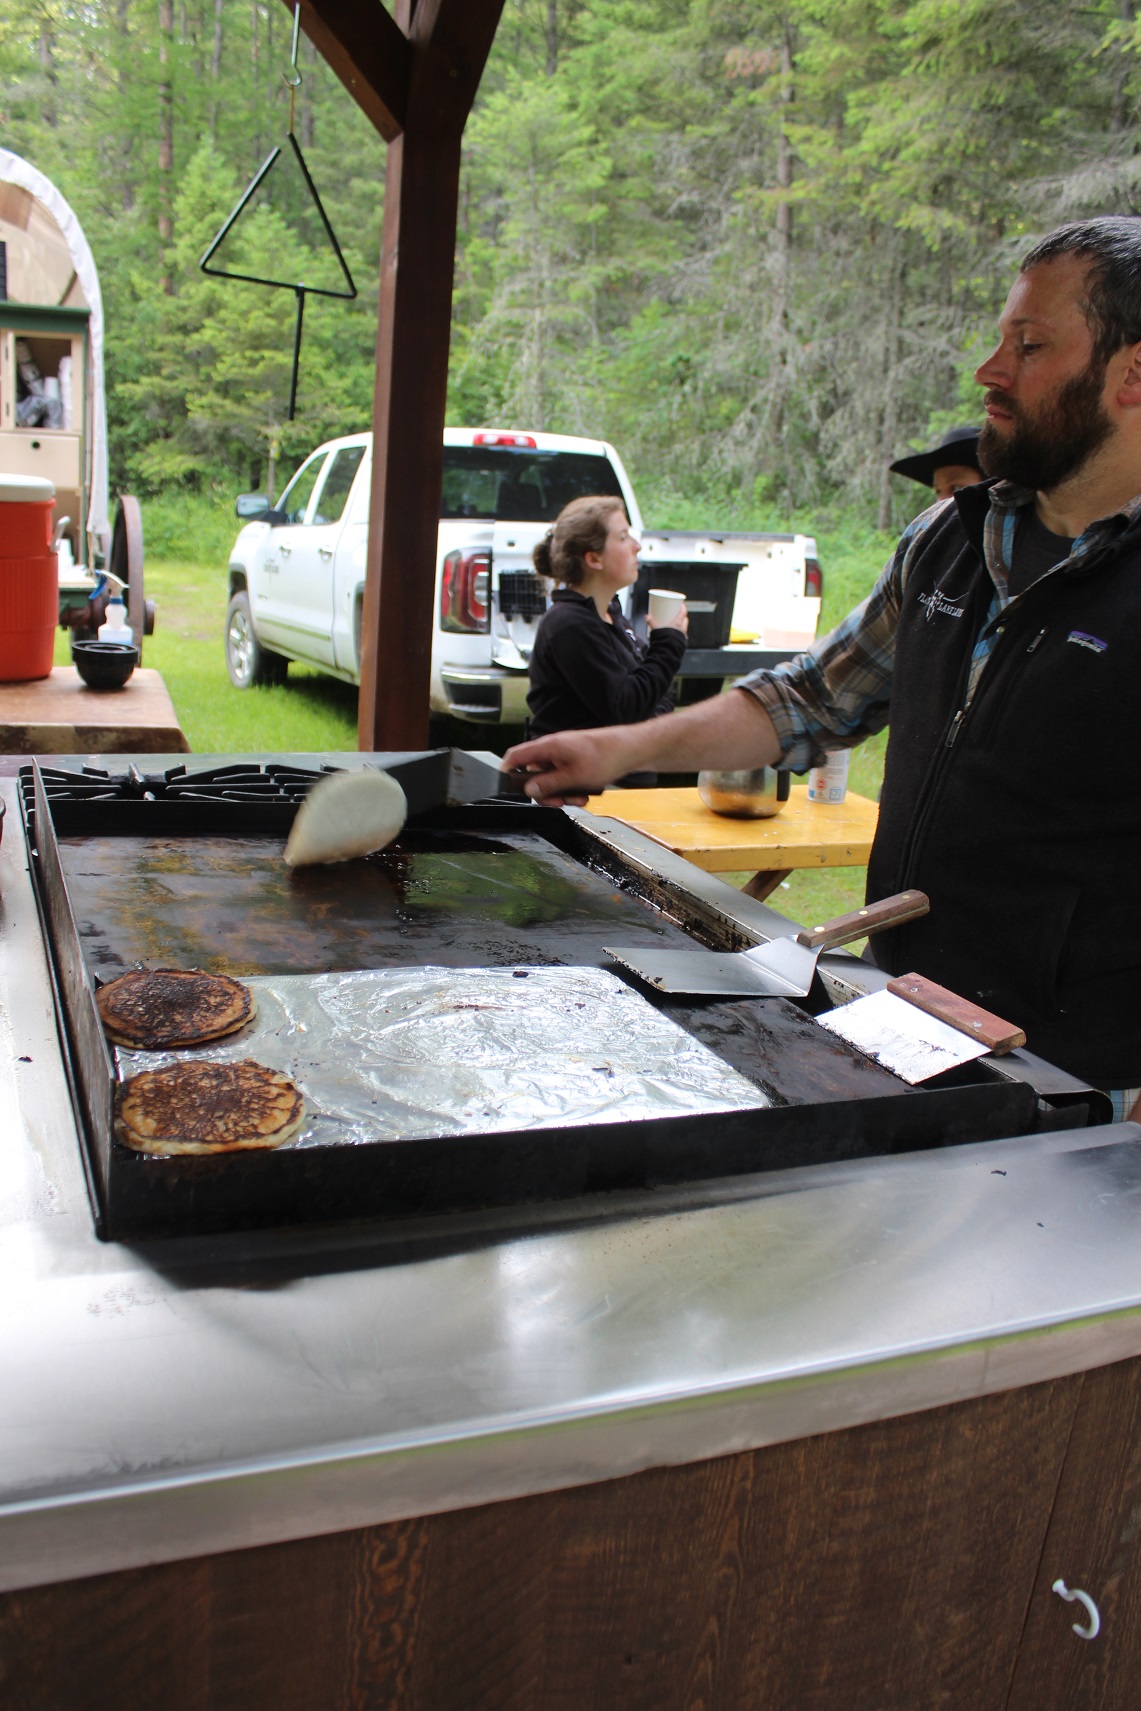 Breakfast is served on trail ride at Flathead Lake Lodge in Montana